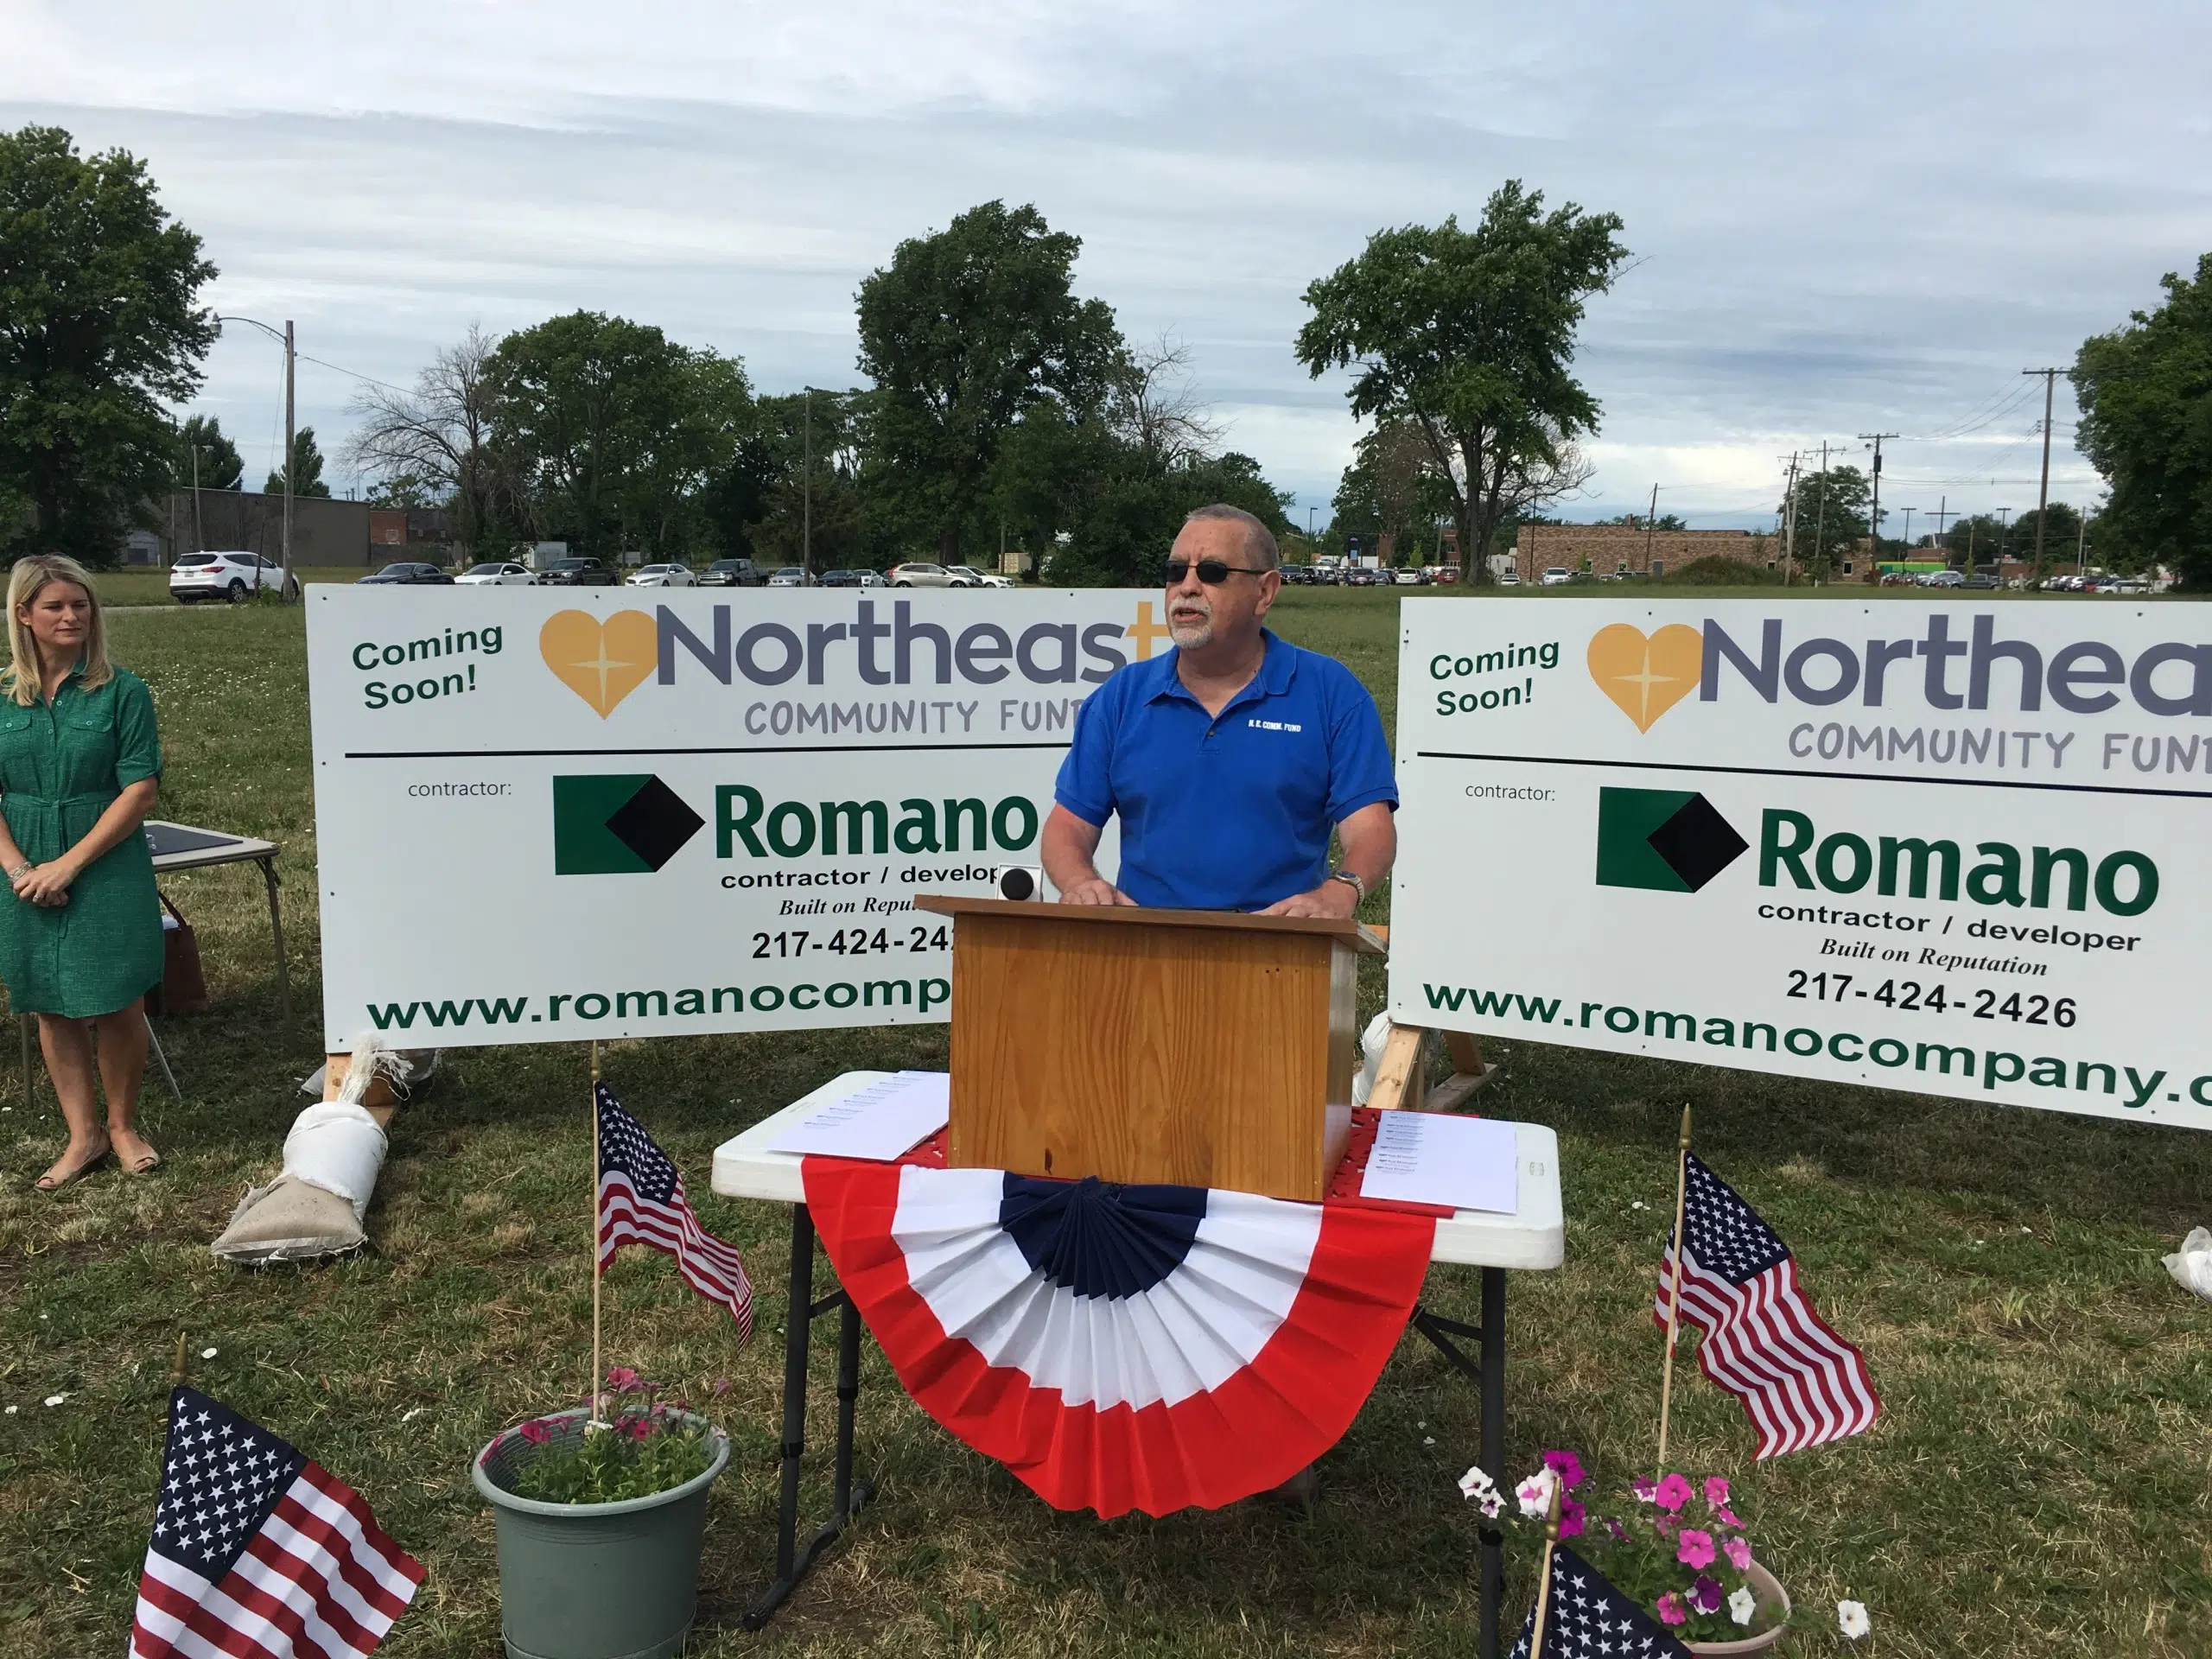 Northeast Community Fund announces a Capital Campaign and New Campus